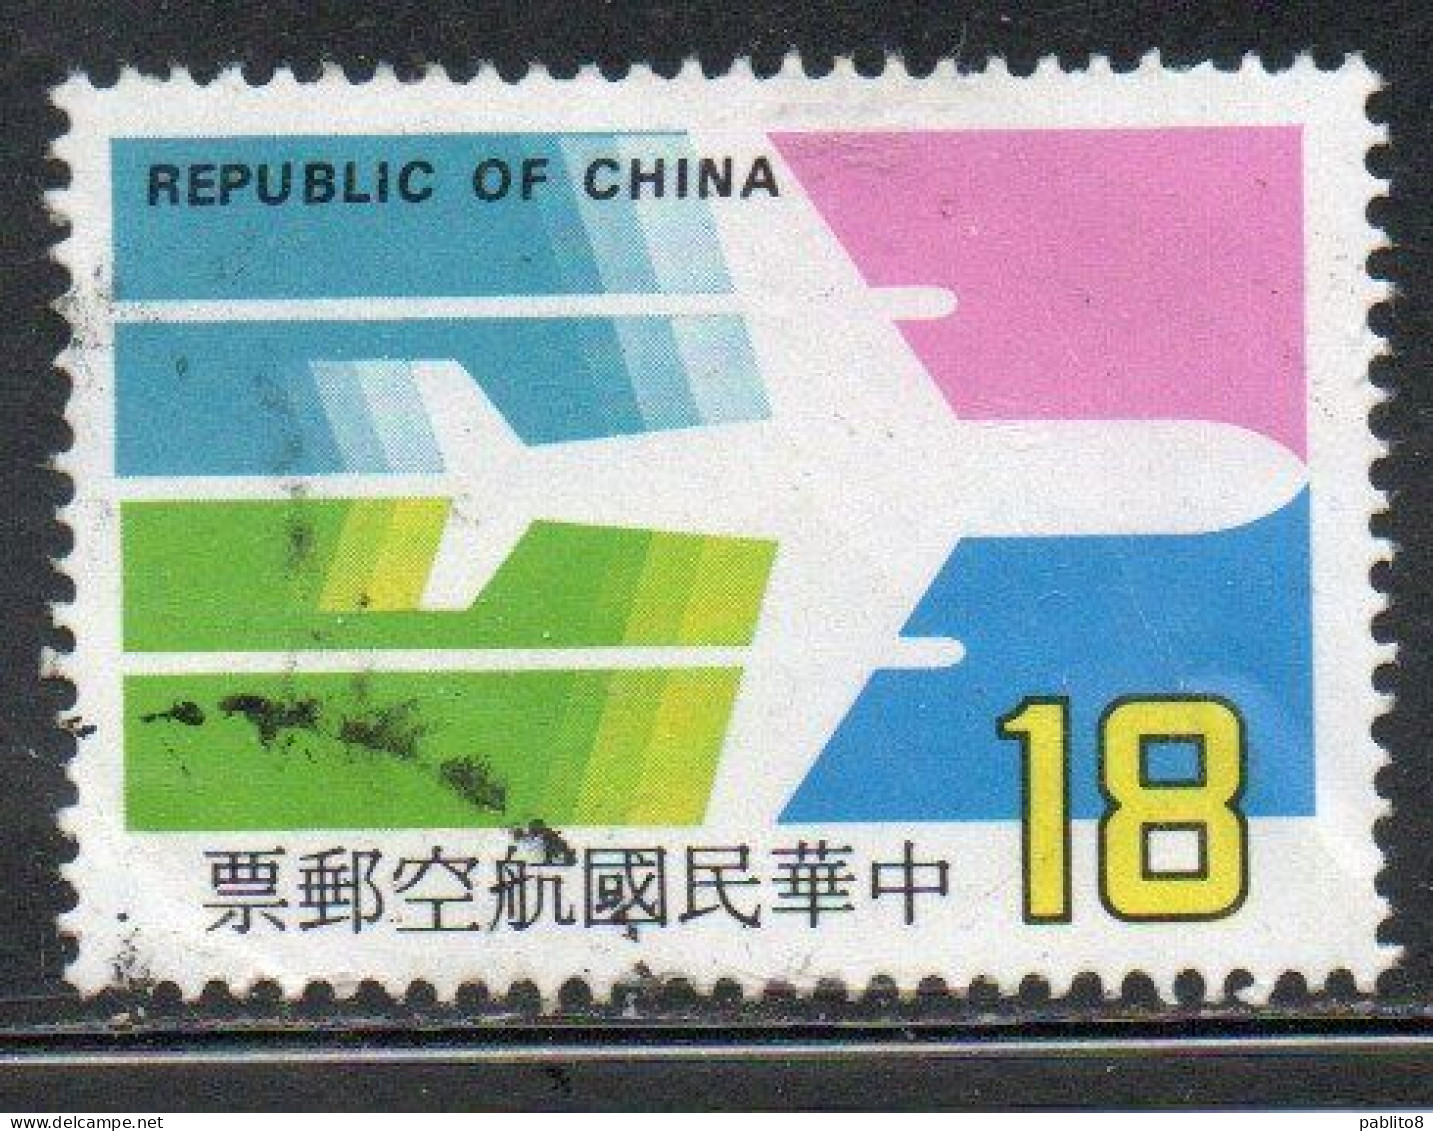 CHINA REPUBLIC CINA TAIWAN FORMOSA 1987 AIR POST MAIL AIRMAIL AIRPLANE 18$ USED USATO OBLITERE' - Airmail